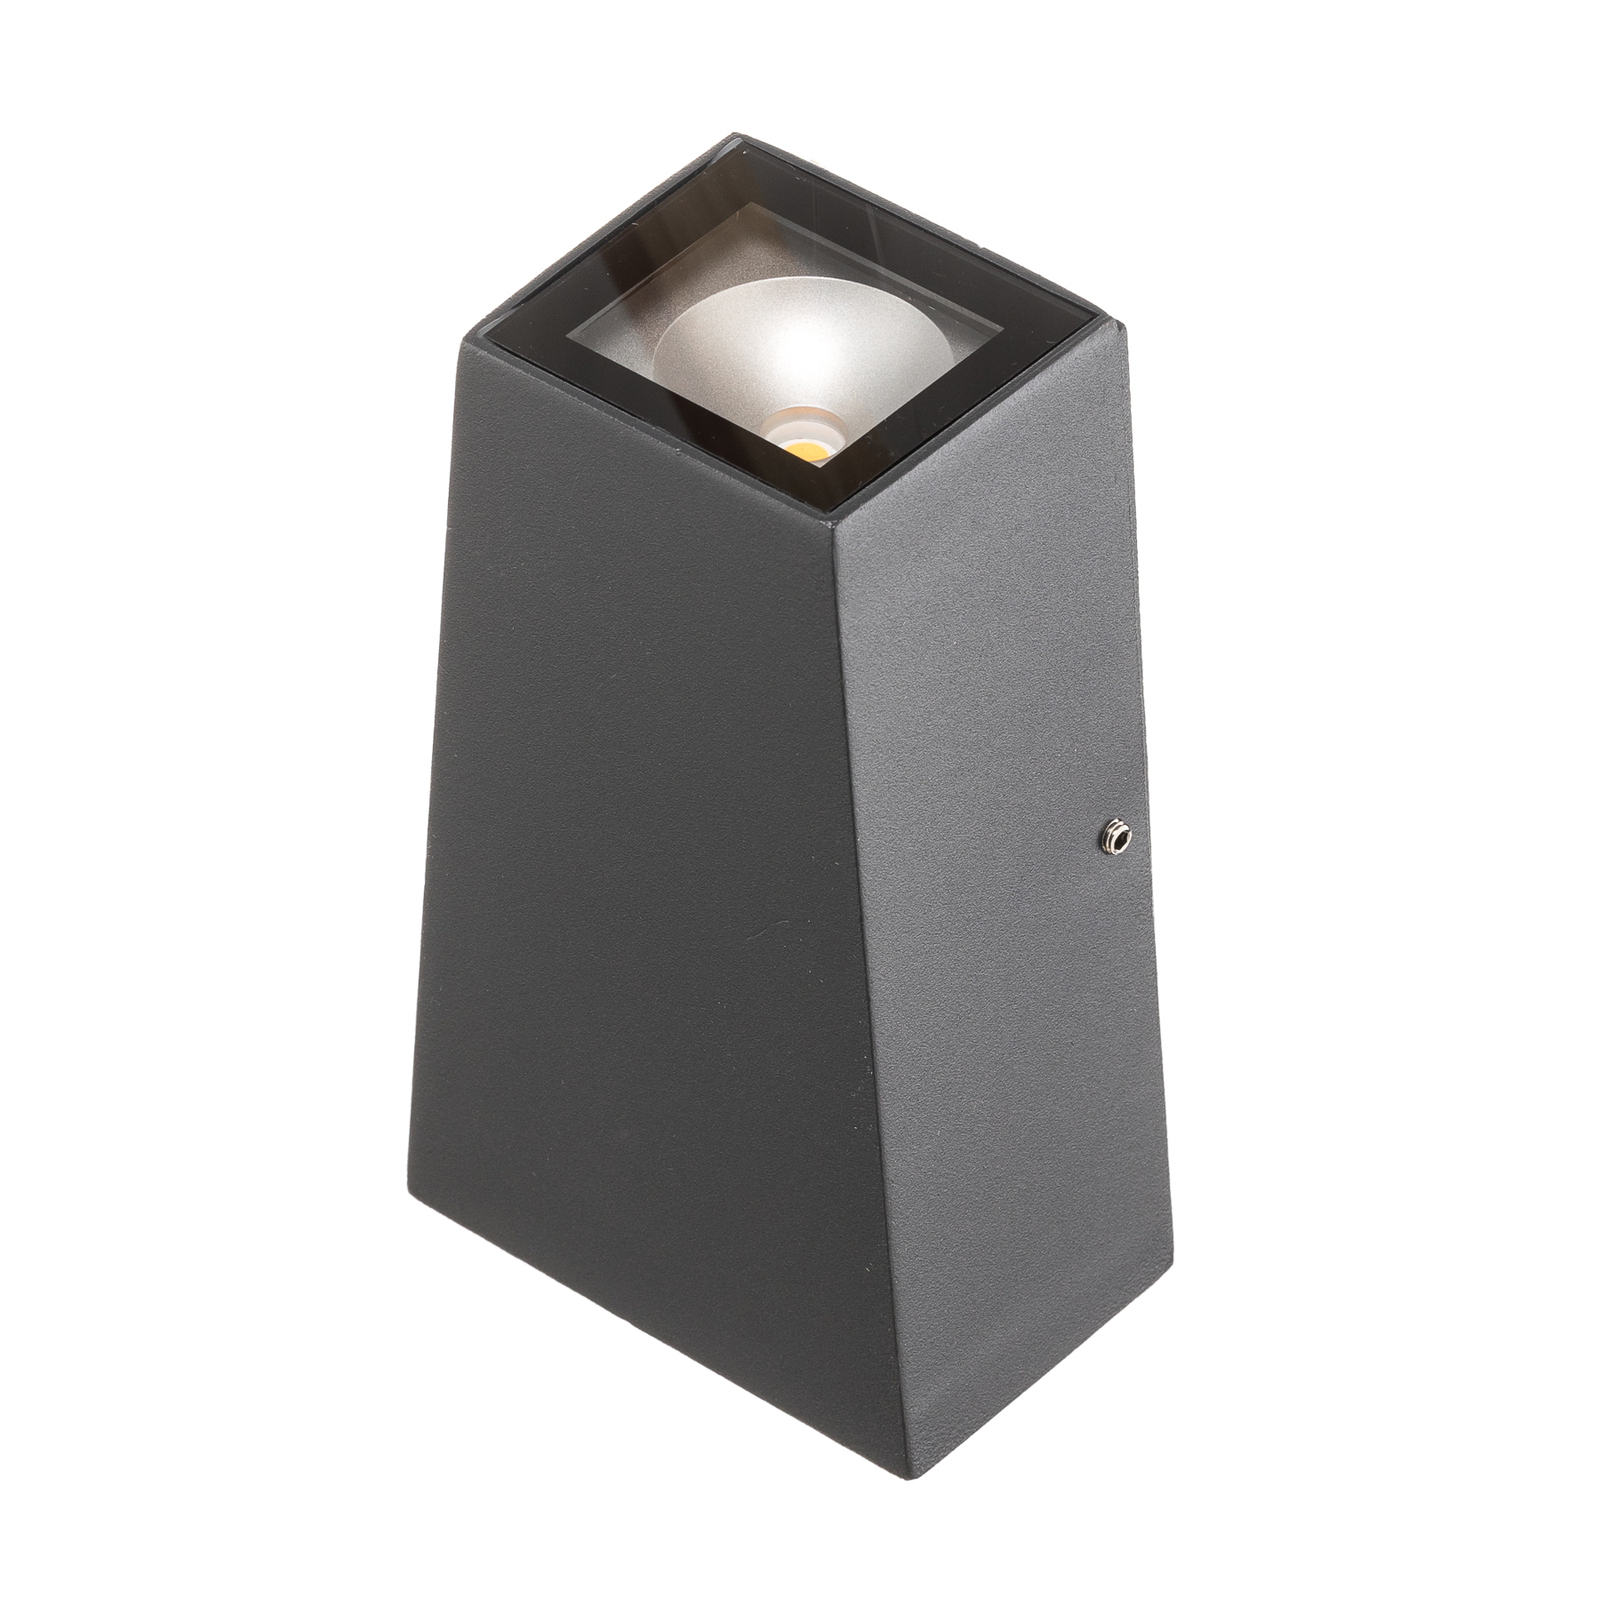 THORNeco Holly Cone Square Up/Down LED-Wandleuchte